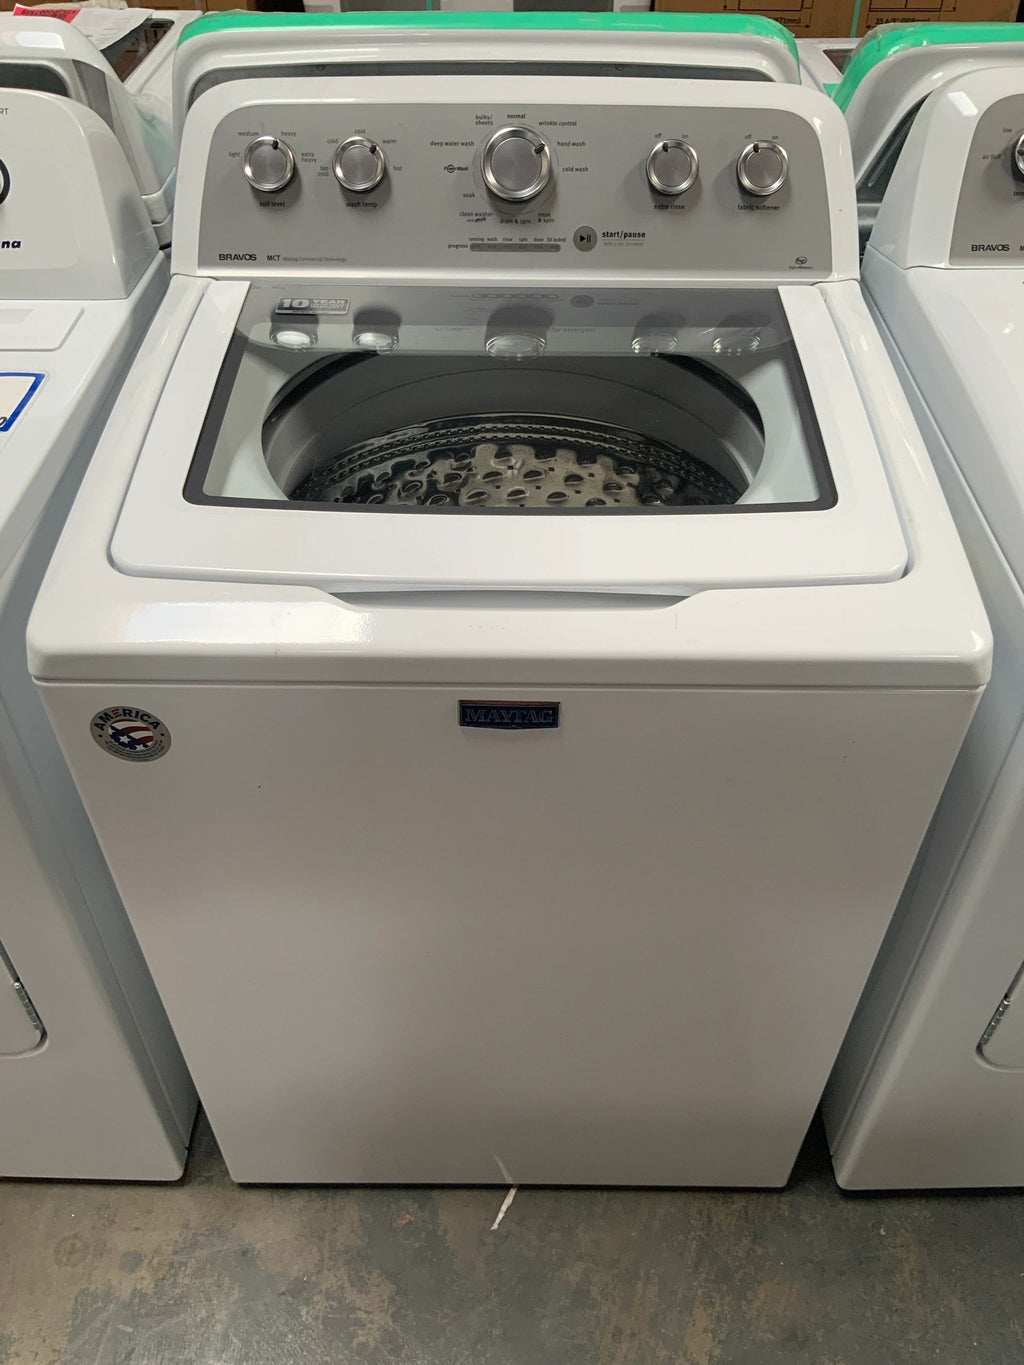 New Open Box. Set of Washer Maytag 4.3-cu ft High Efficiency Impeller Top-Load Washer (White) and Dryer Maytag Bravos 7.0 cu. ft. Electric Dryer in White. Model: MEDX655DW1, MVWX655DW